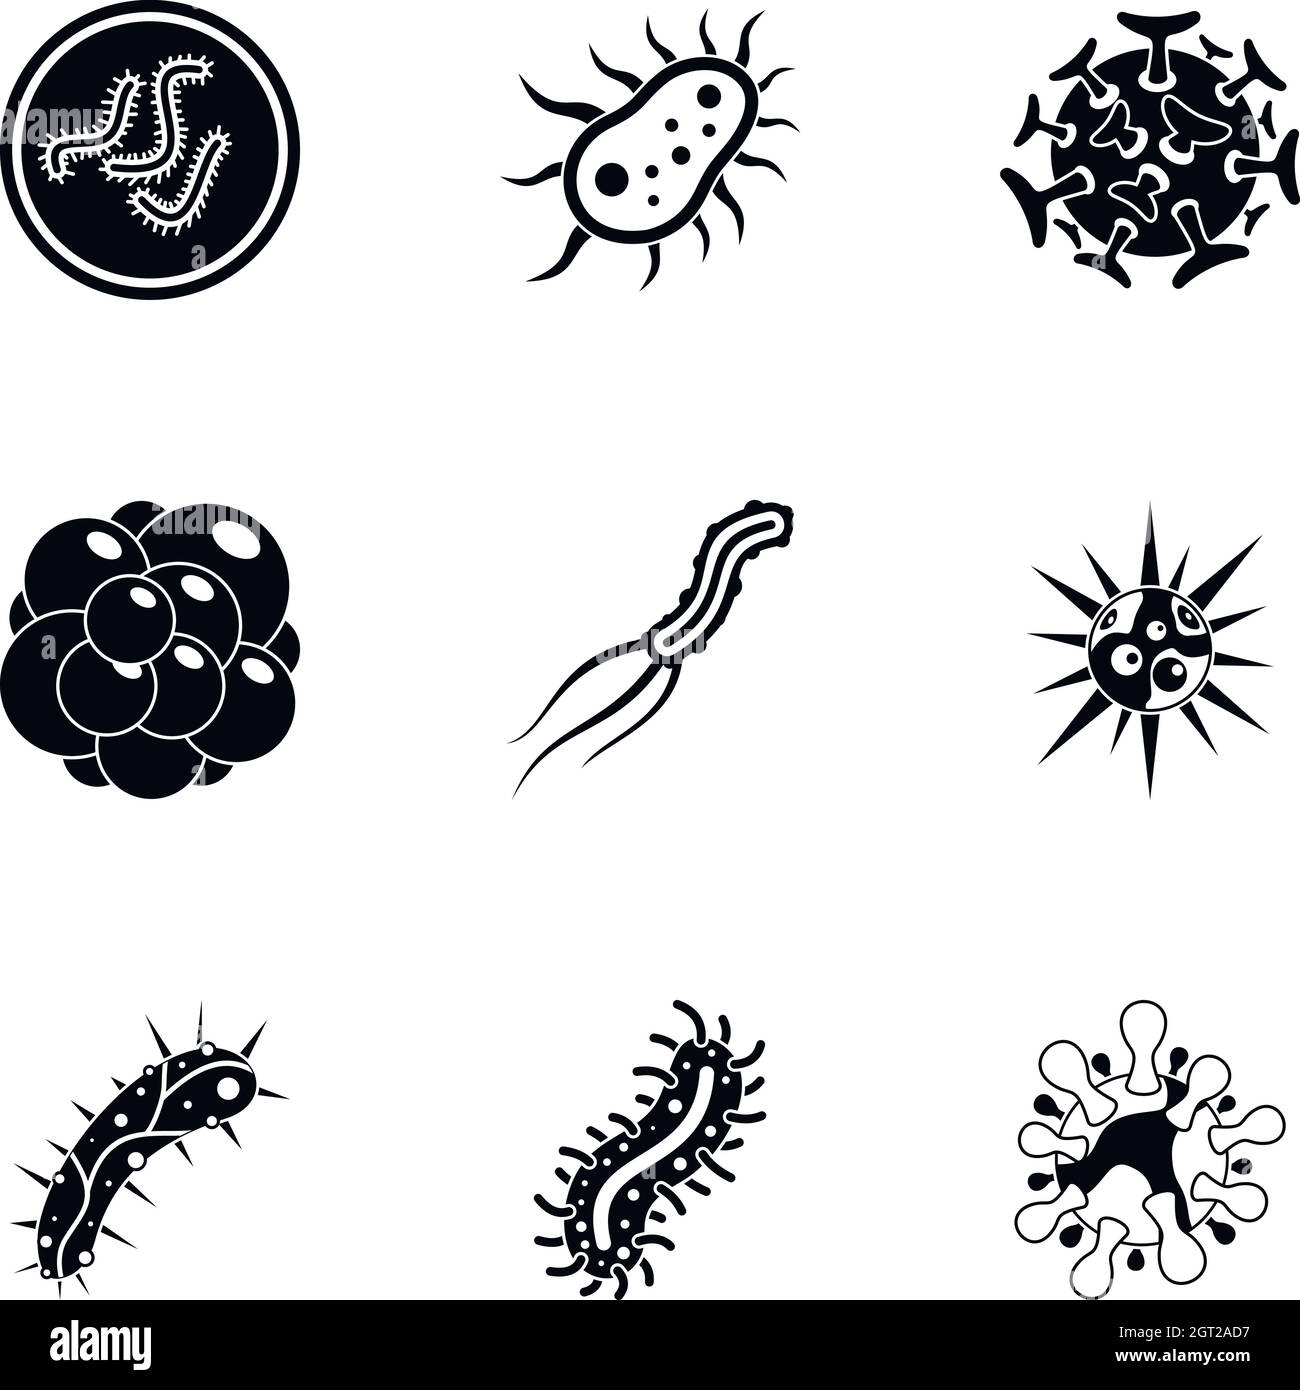 Viruses icons set, simple style Stock Vector